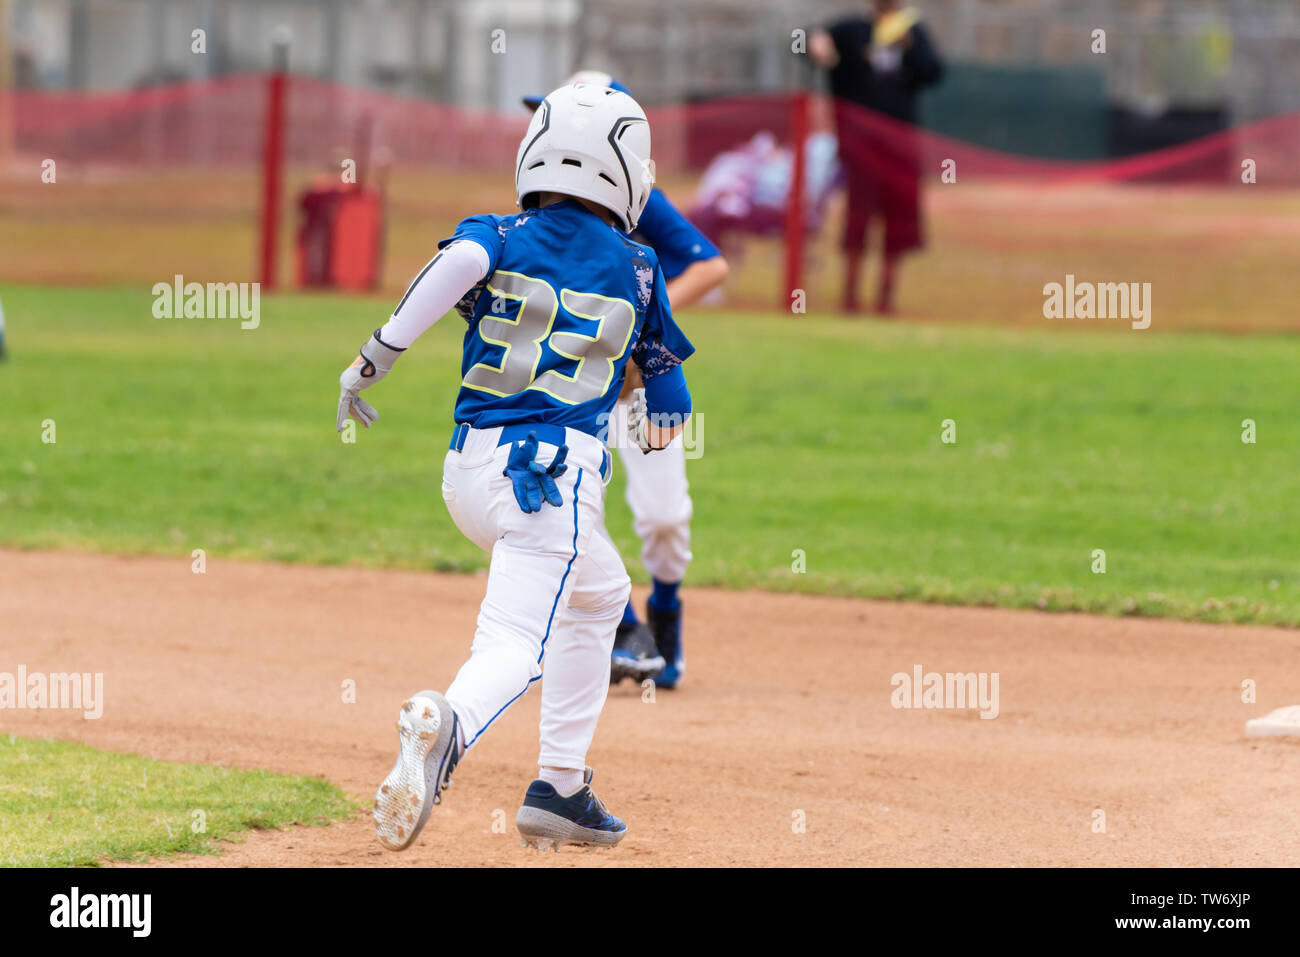 Youth baseball player in blue uniform and white helmet sprints across infield to steal second base. Stock Photo